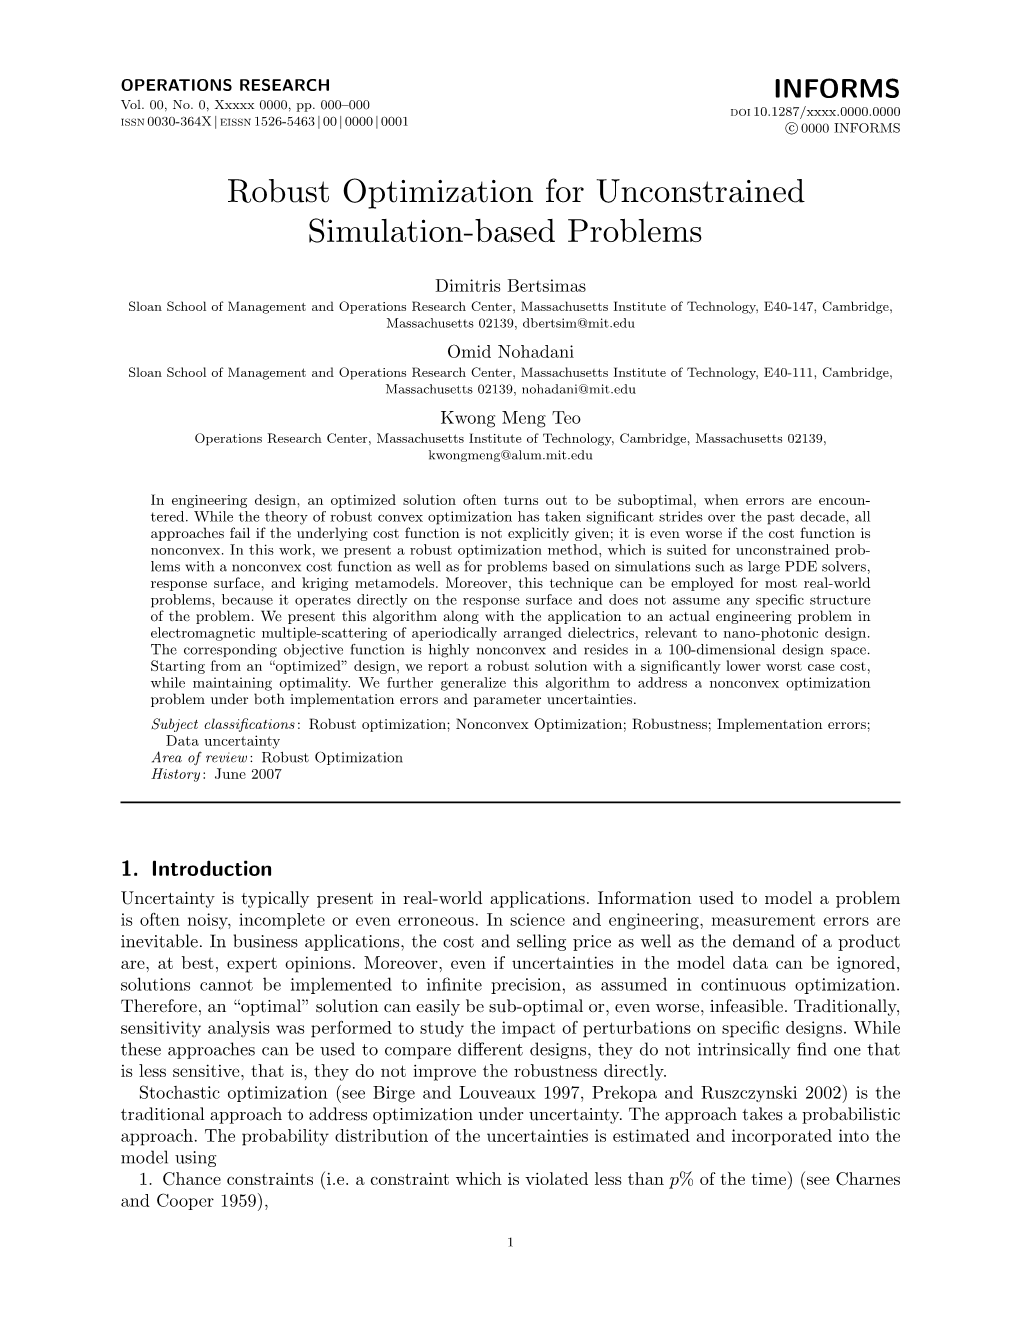 Robust Nonconvex Optimization for Simulation Based Problems